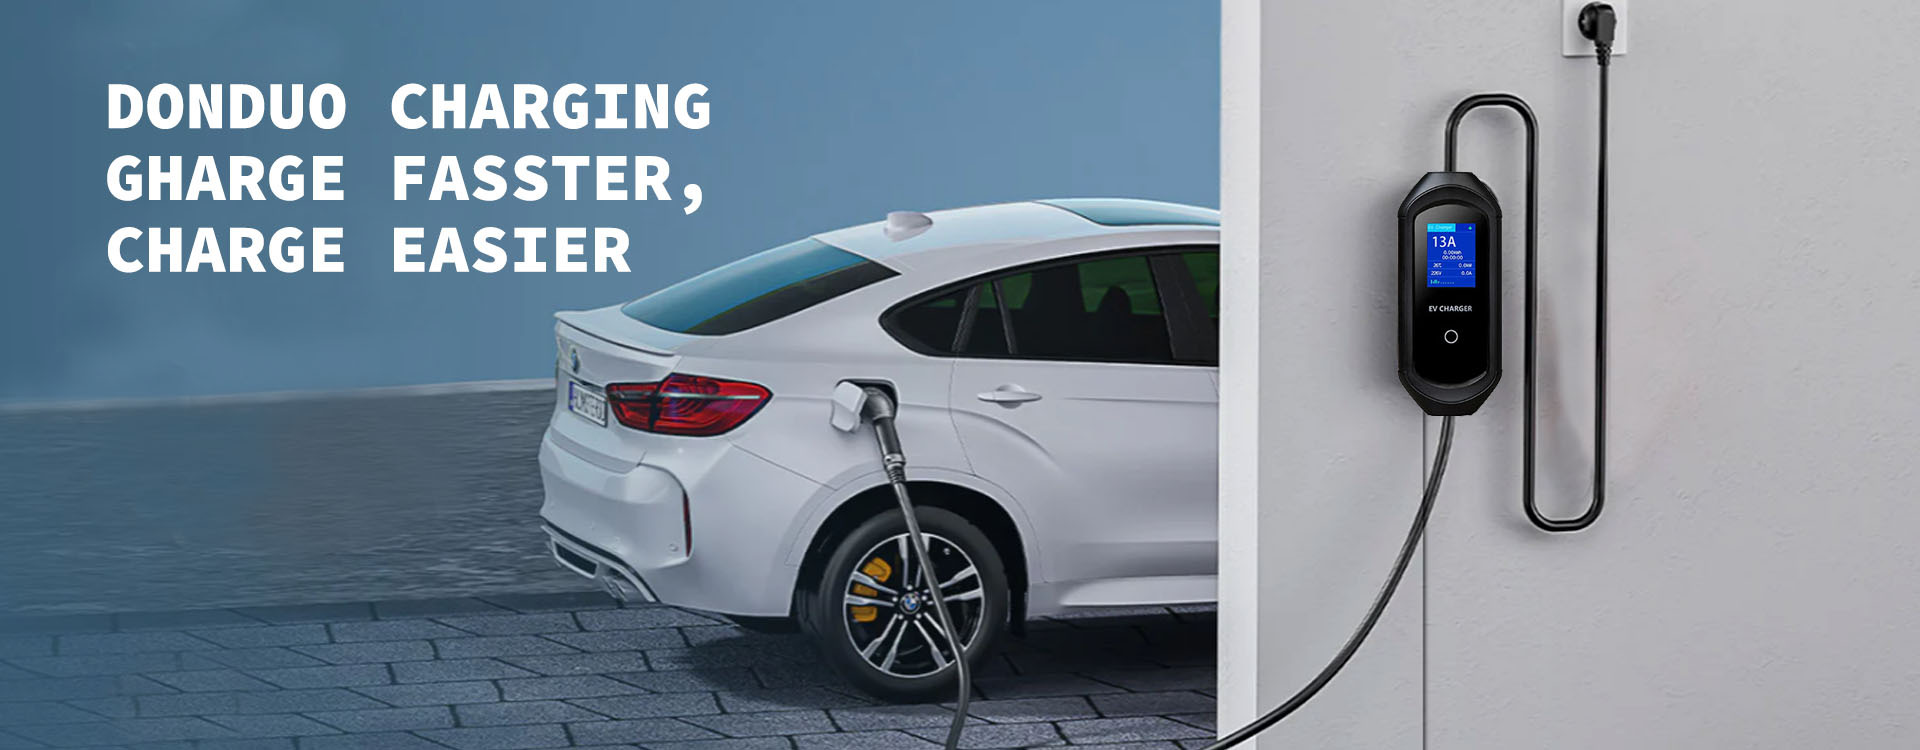 New Energy Electric Vehicle Charging